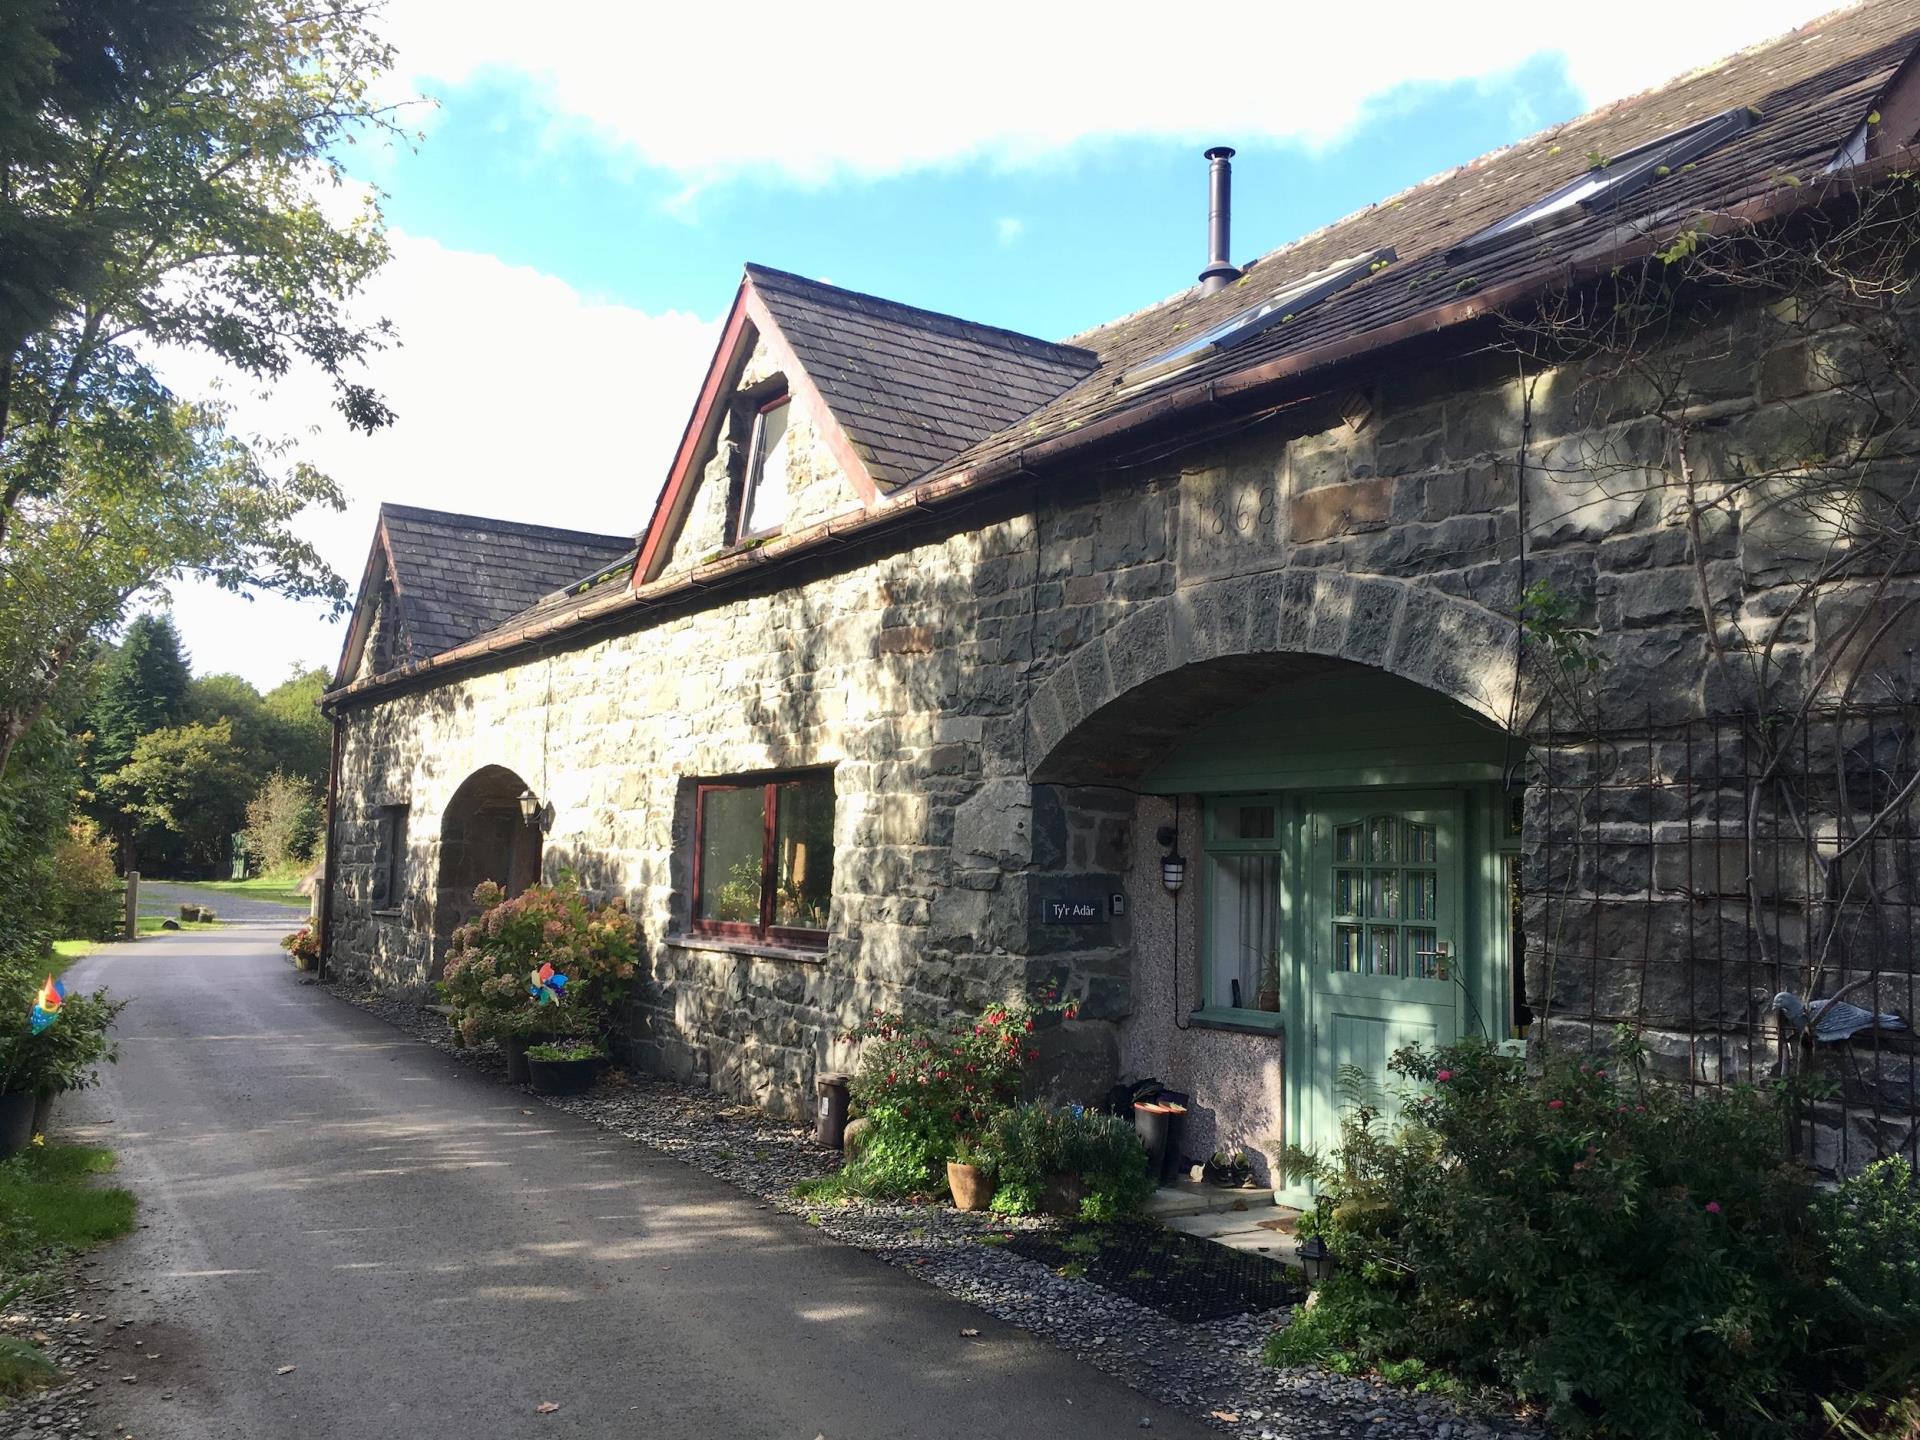 Holiday cottage with woodburner in Snowdonia